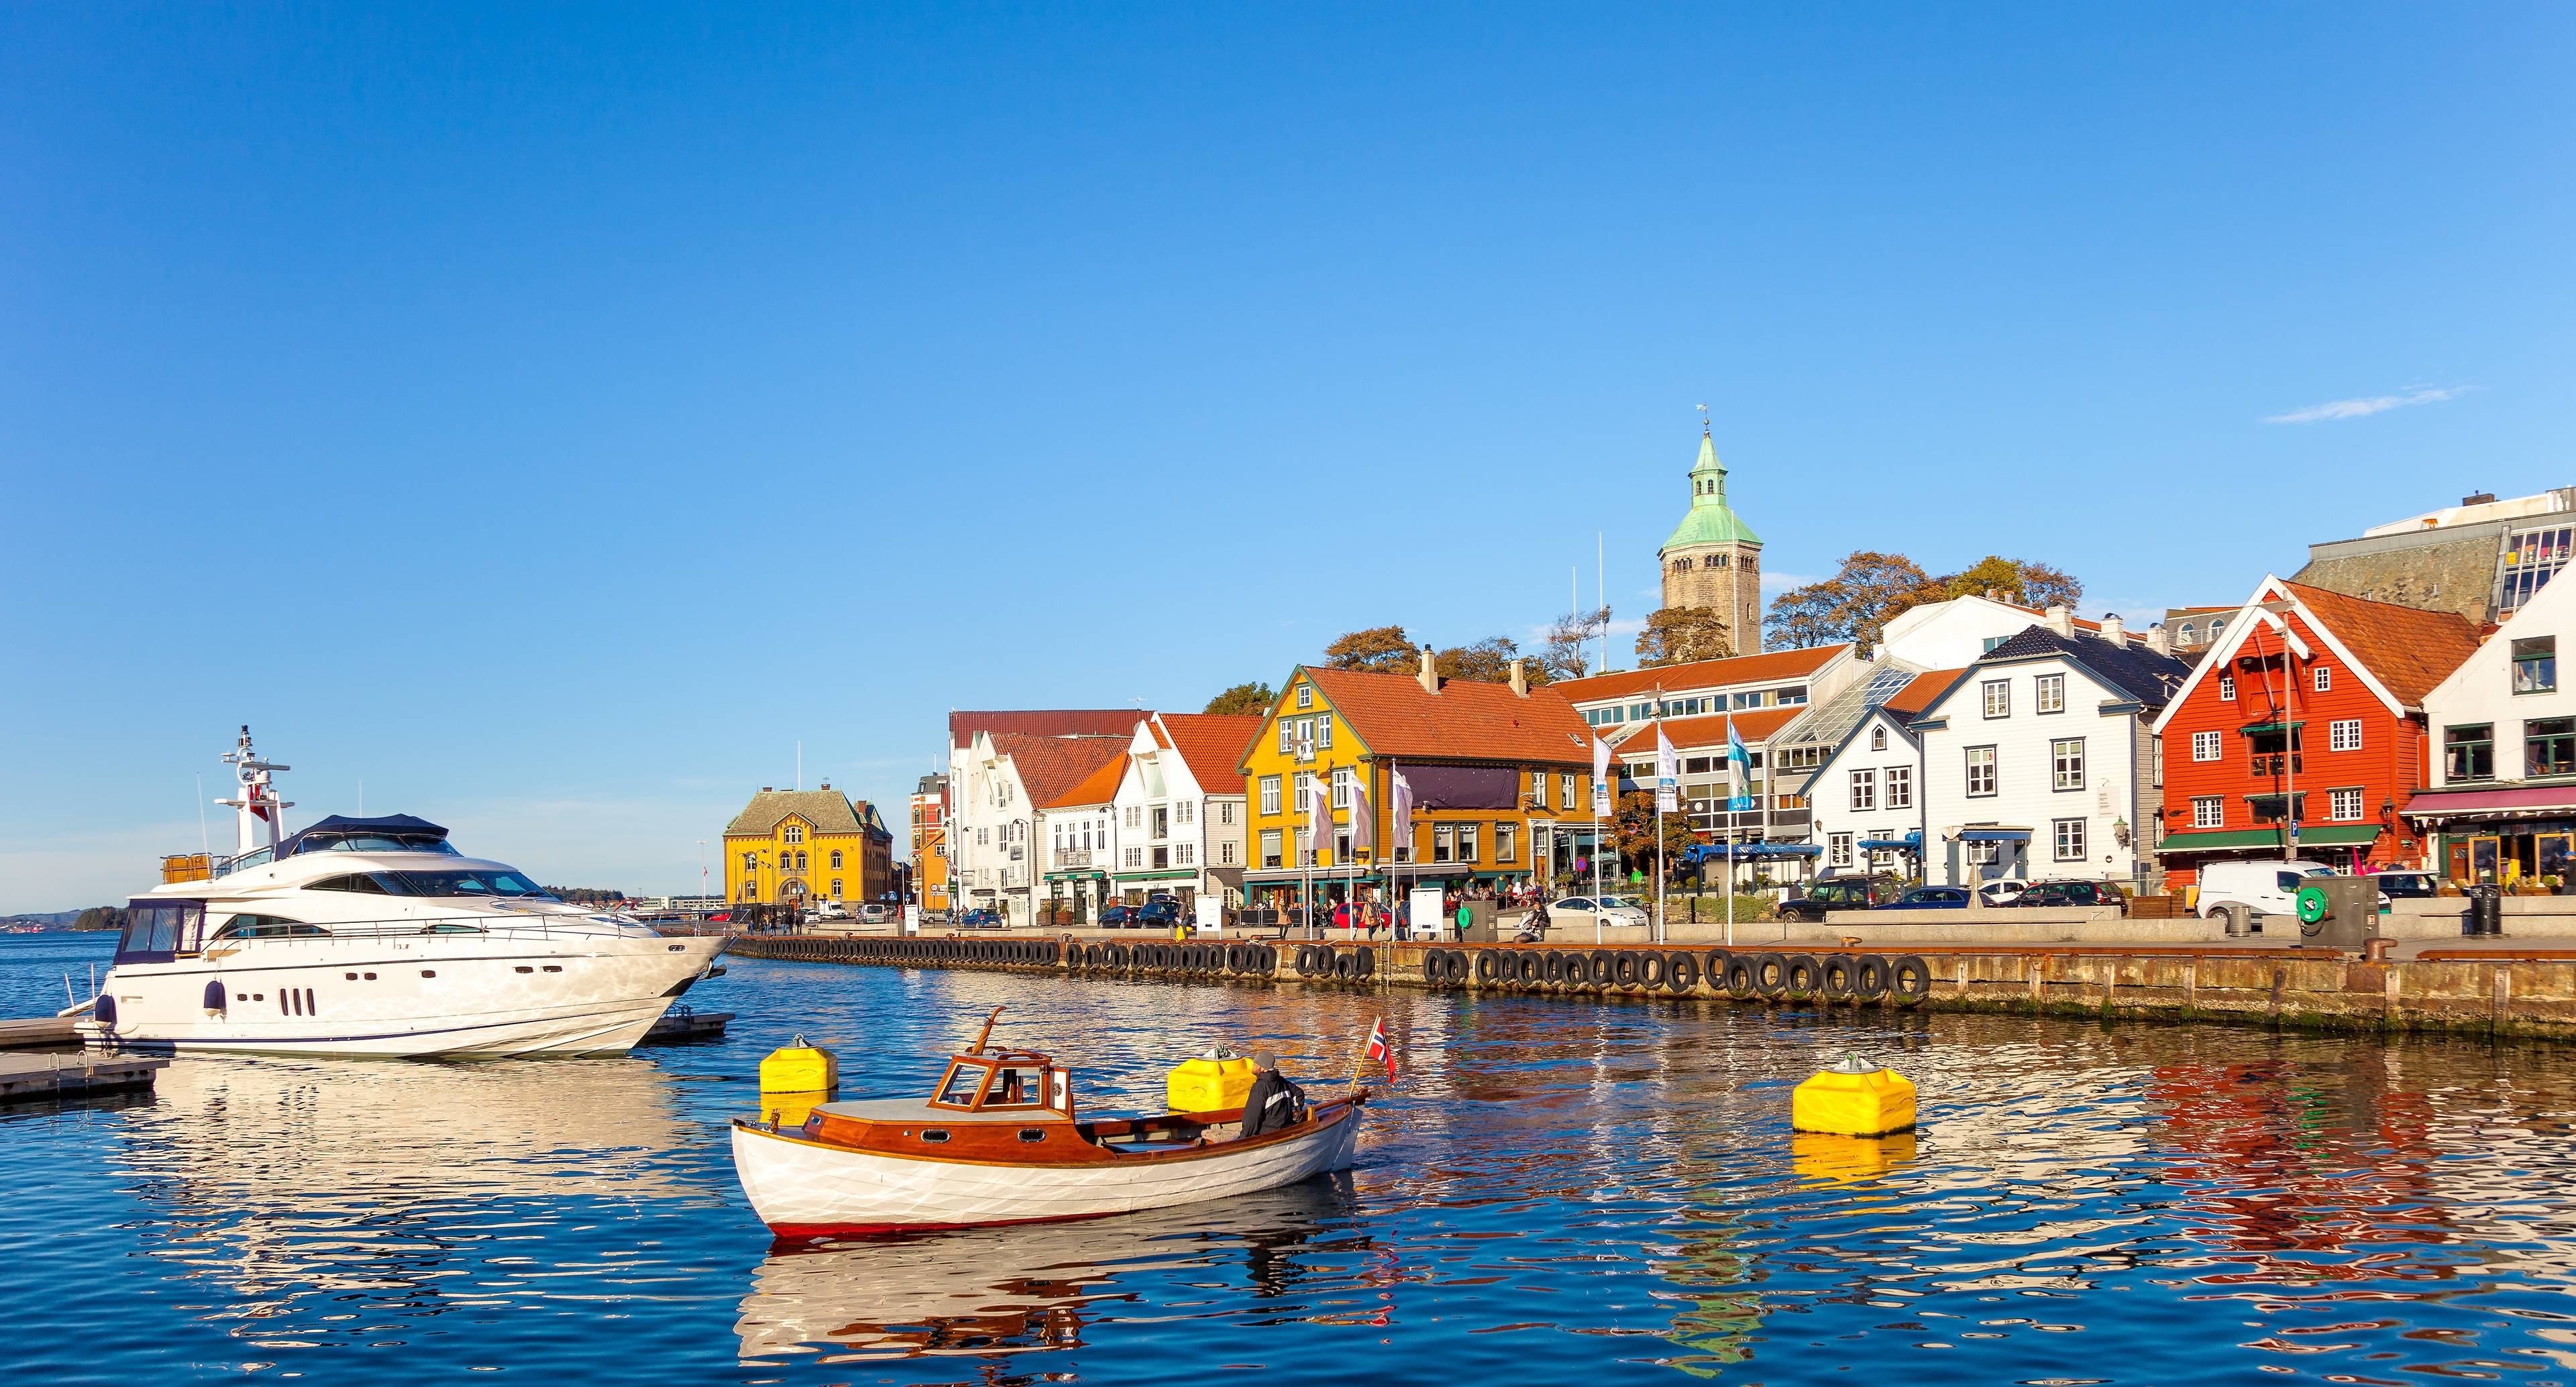 Take a Trip Back Through History in Norway's Oil Capital, Stavanger